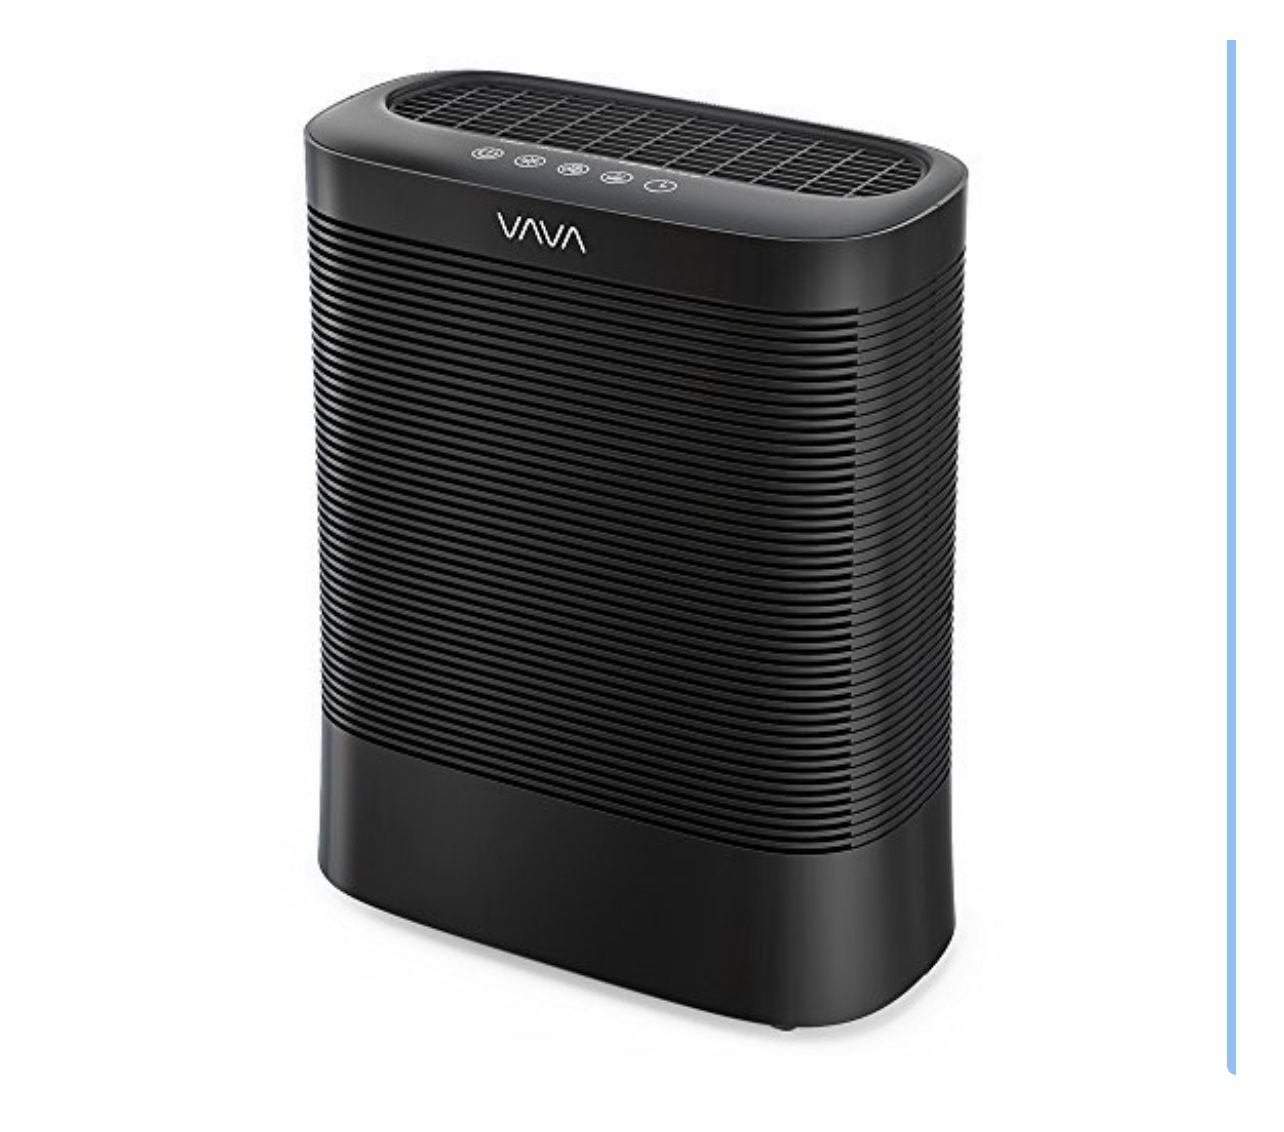 VAVA Air Purifier for Home Air Filter System with UV-C Light Sanitizer, Purifier with 3in1 True HEPA Fits for 270 Sq. Ft Allergens Smoke Pollen Pets H